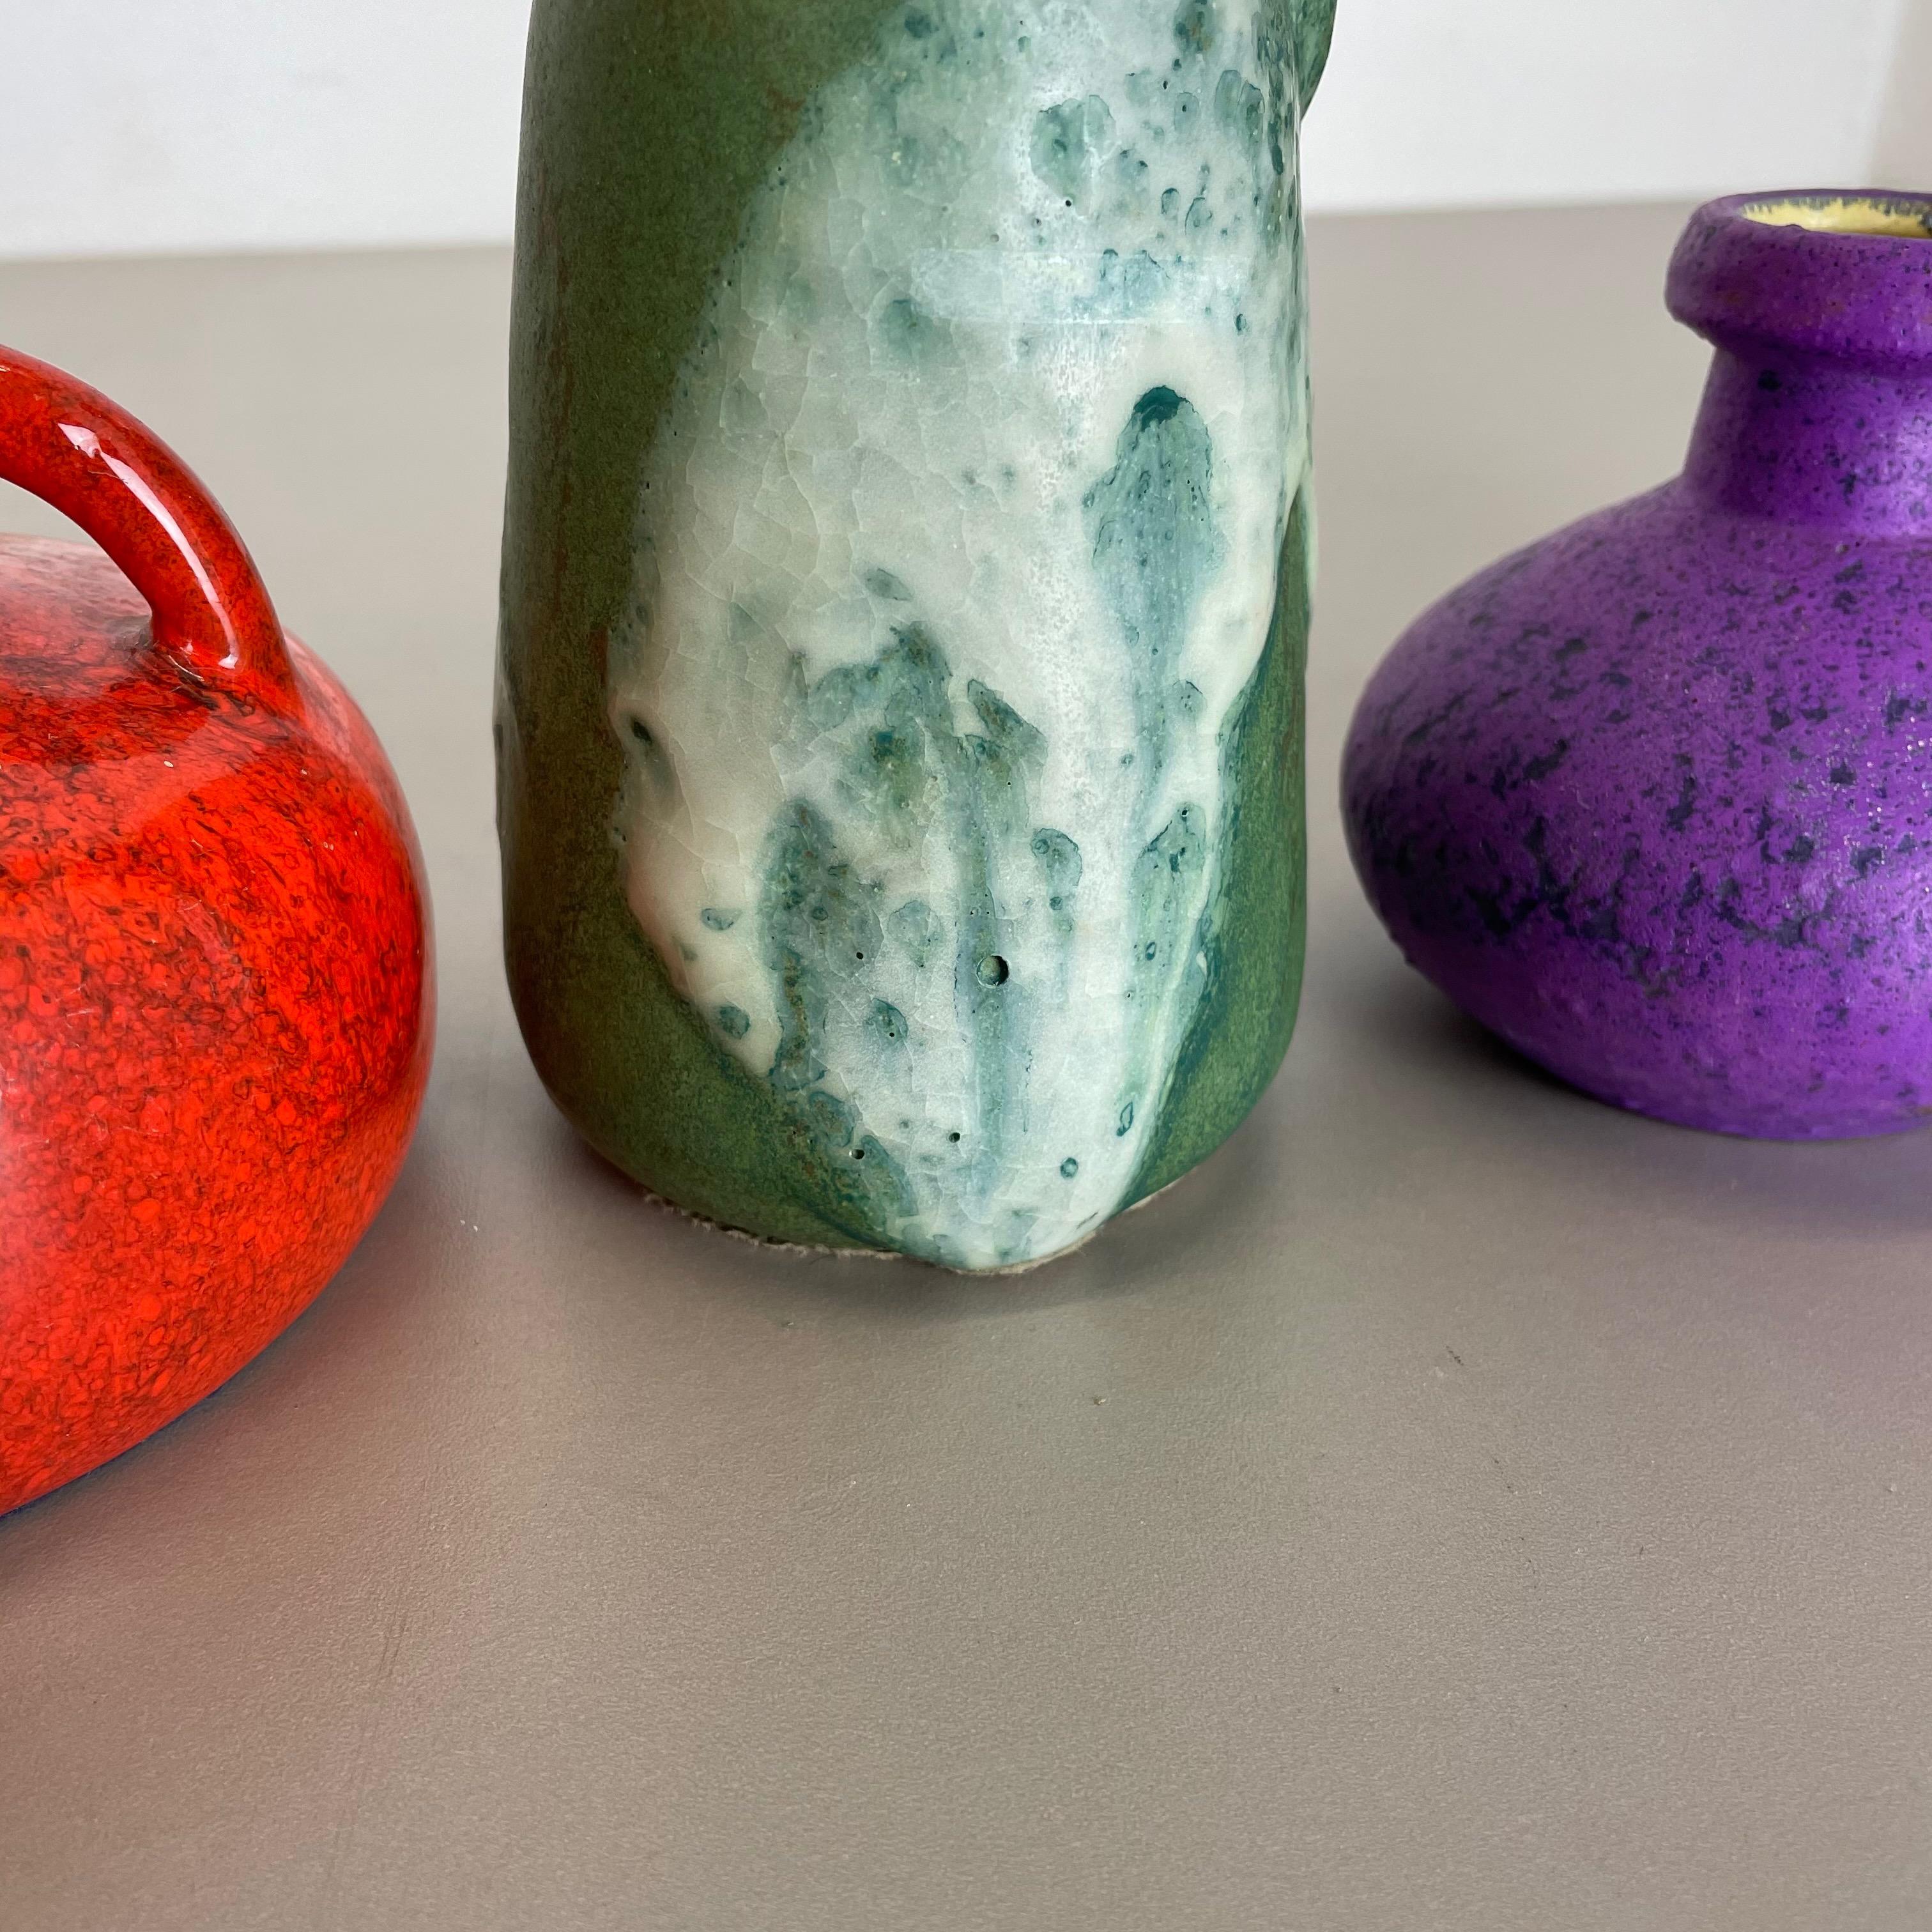 Set of 5 Multicolor Ceramic Pottery Vase Objects by Otto Keramik, Germany, 1970s For Sale 5